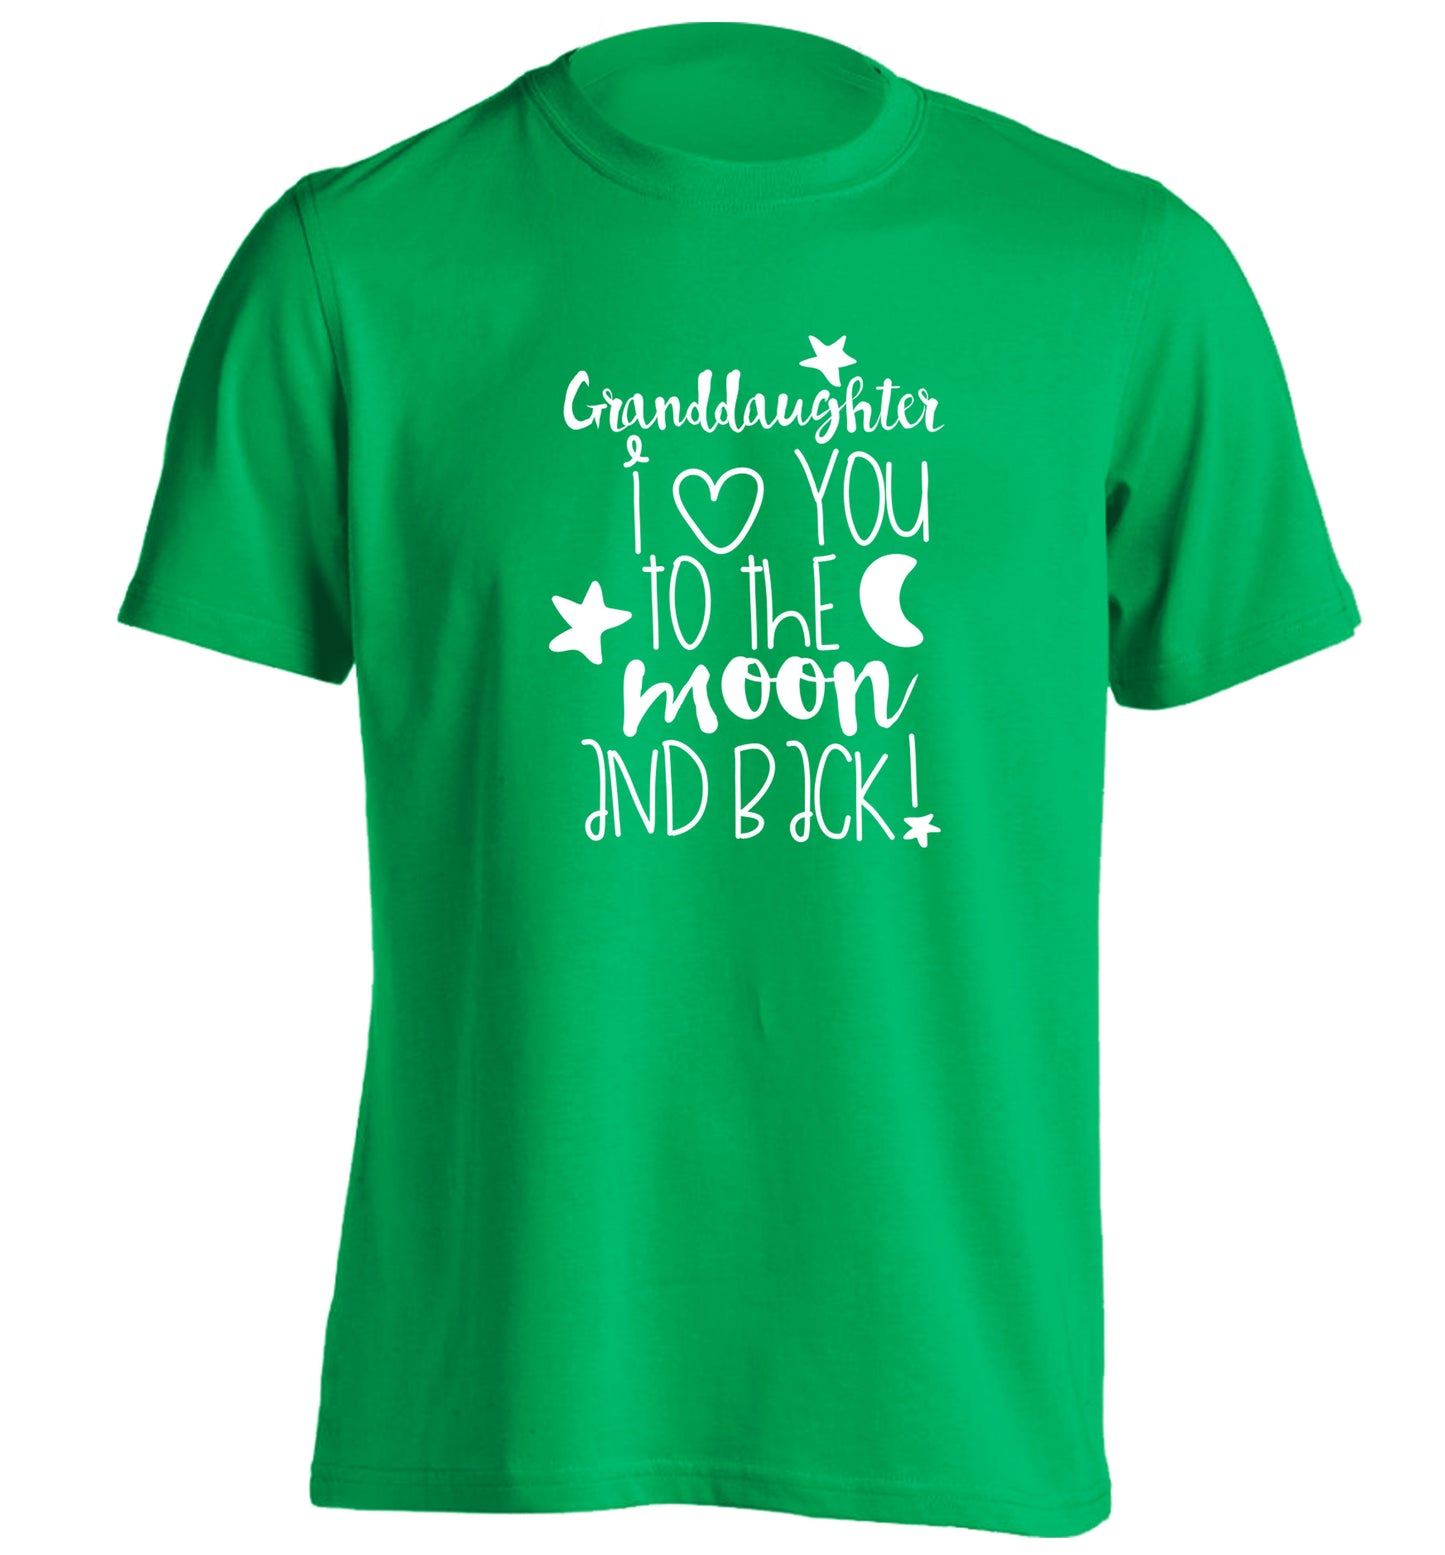 Granddaughter I love you to the moon and back adults unisex green Tshirt 2XL